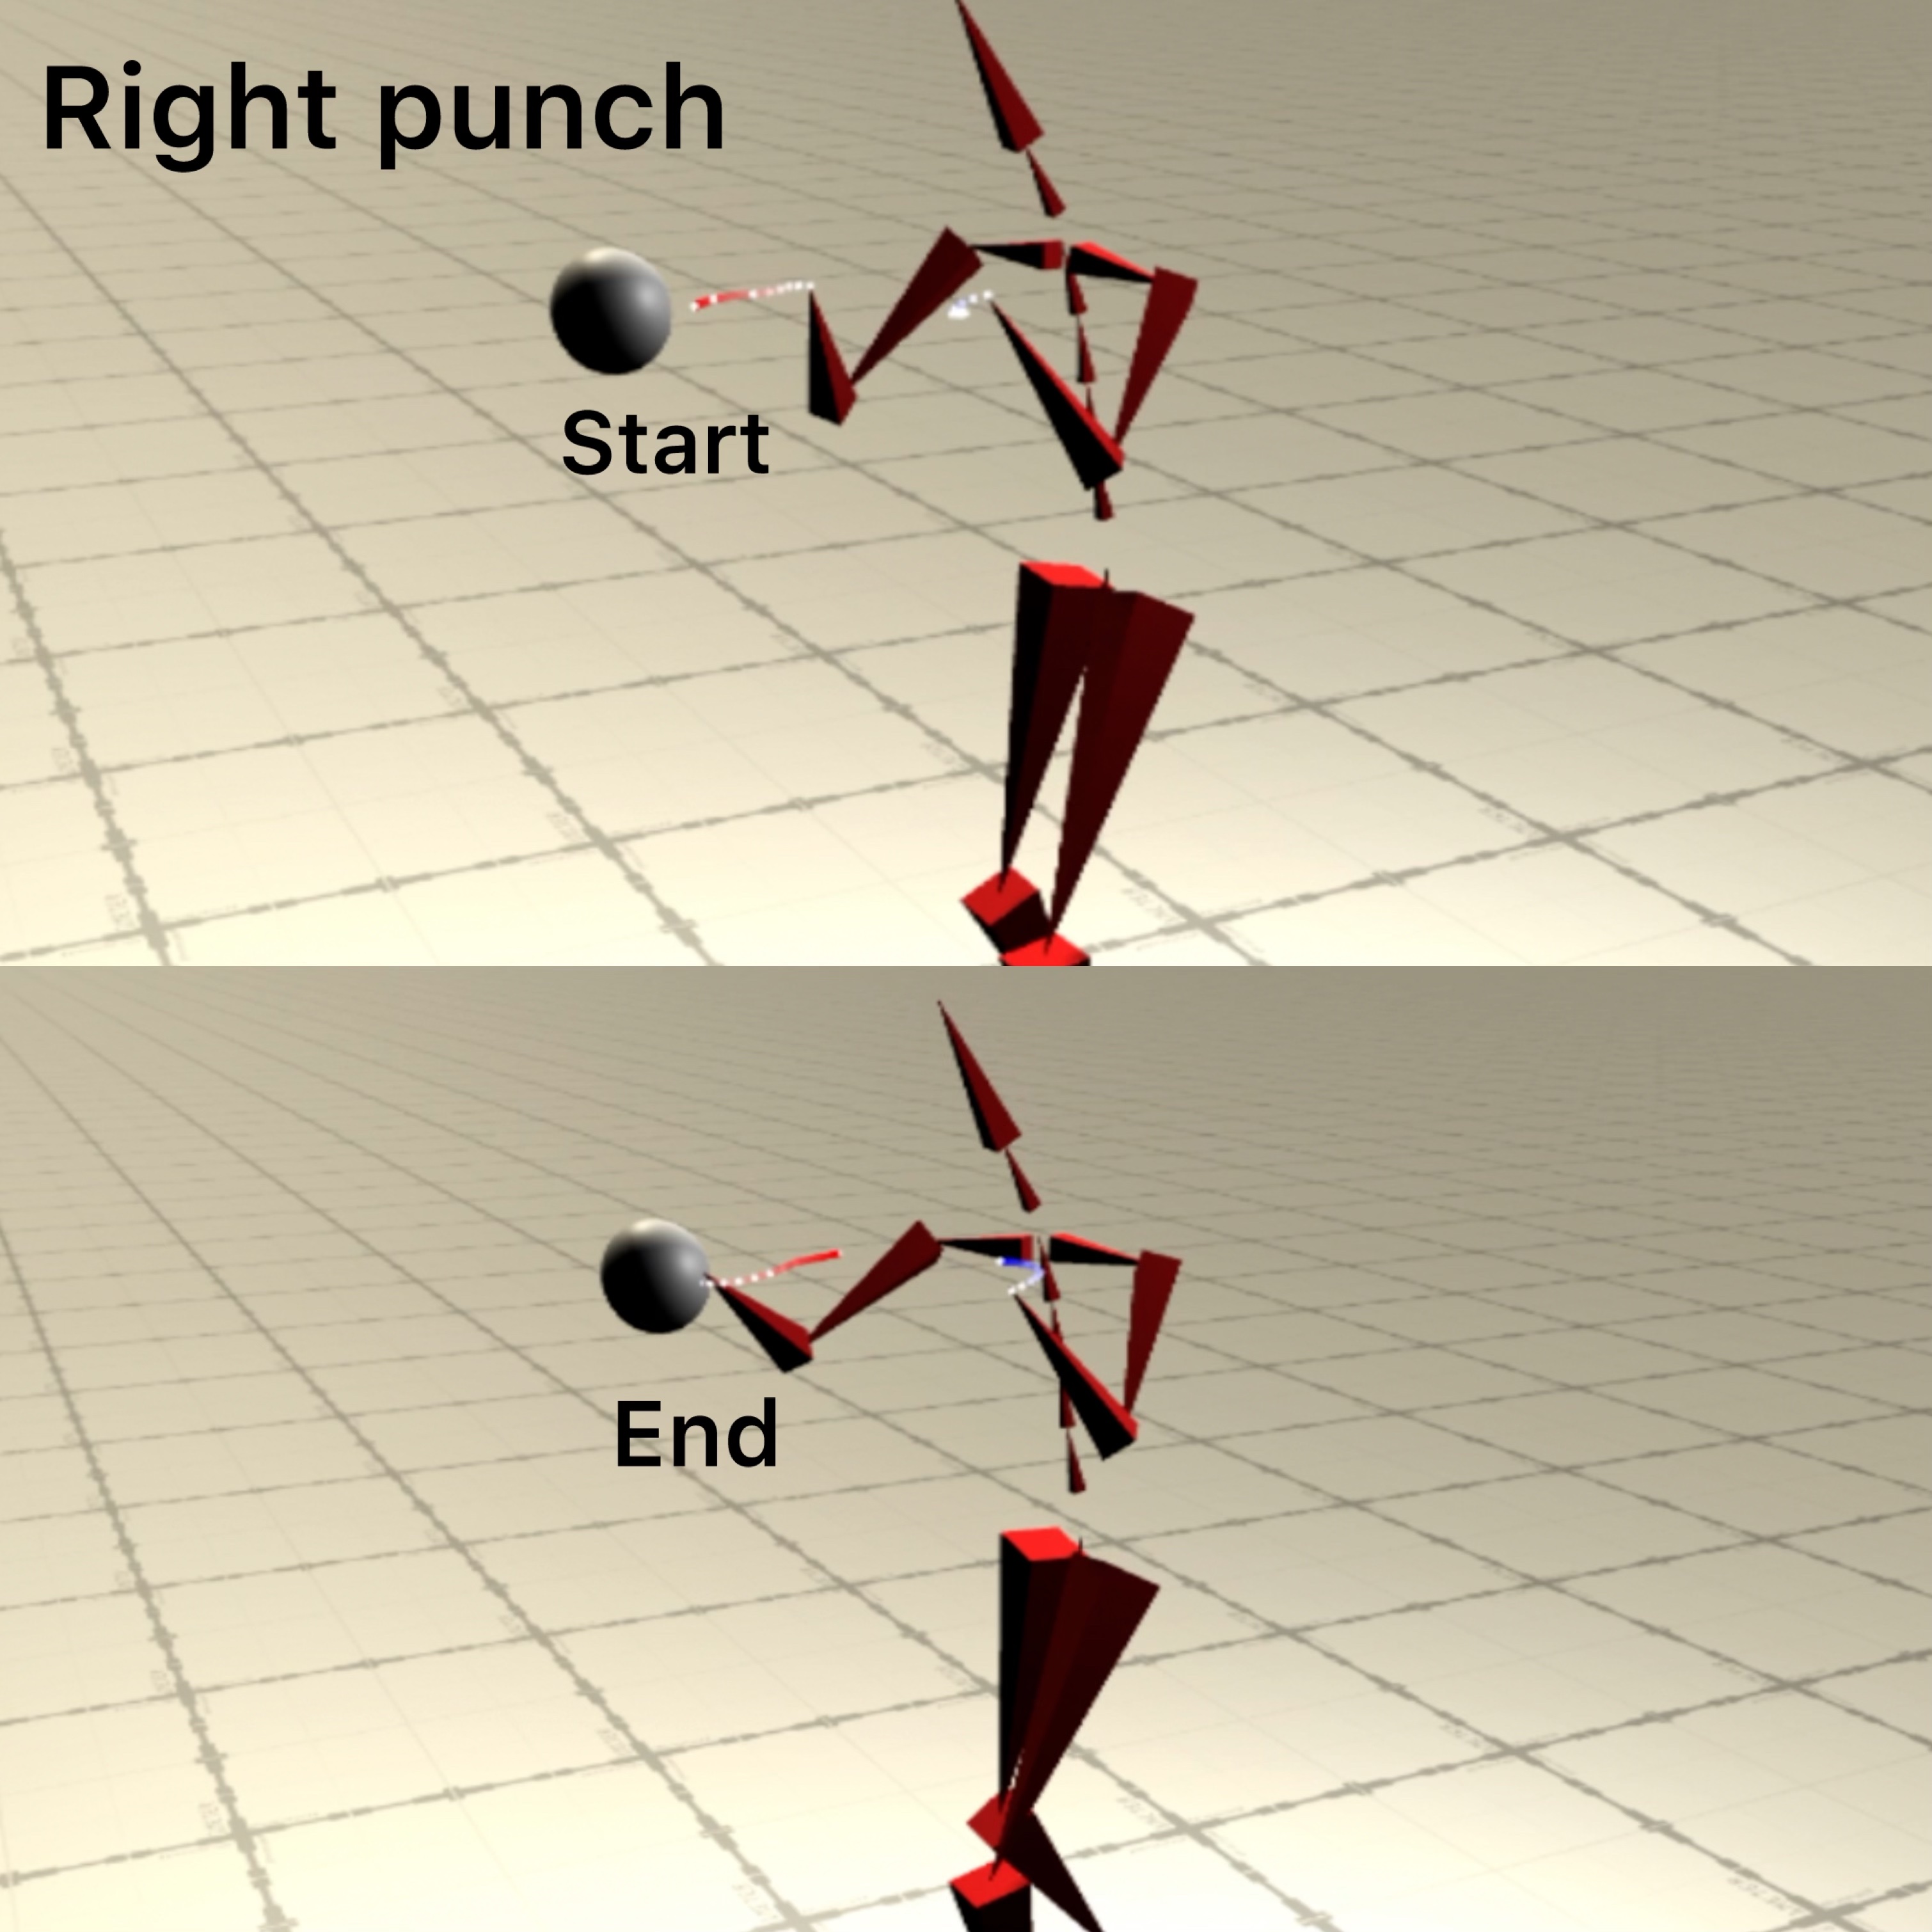 Right punch